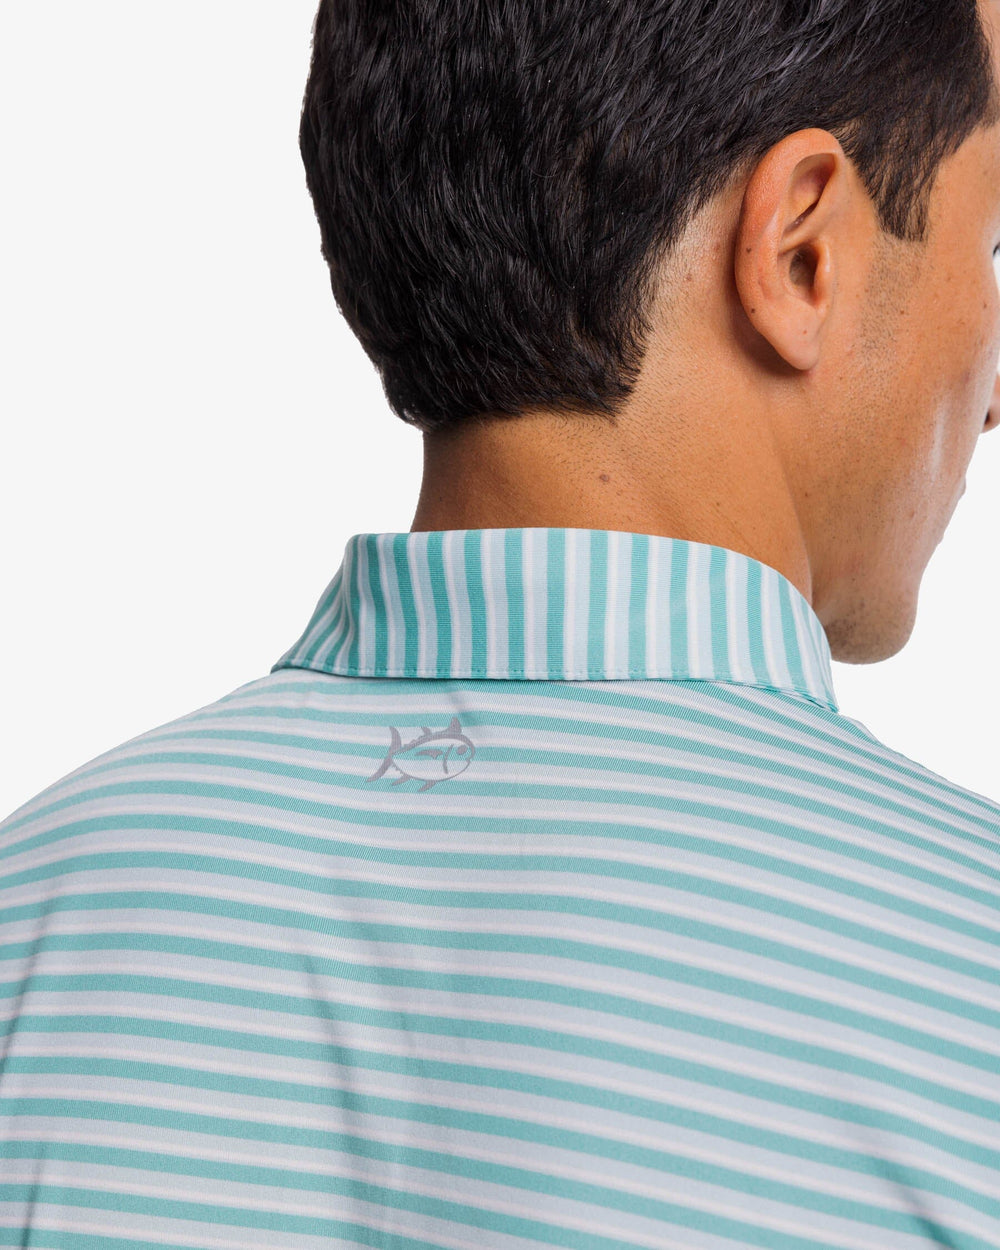 The yoke view of the Southern Tide Driver Gulf Stripe Polo Shirt by Southern Tide - Turquoise Sea